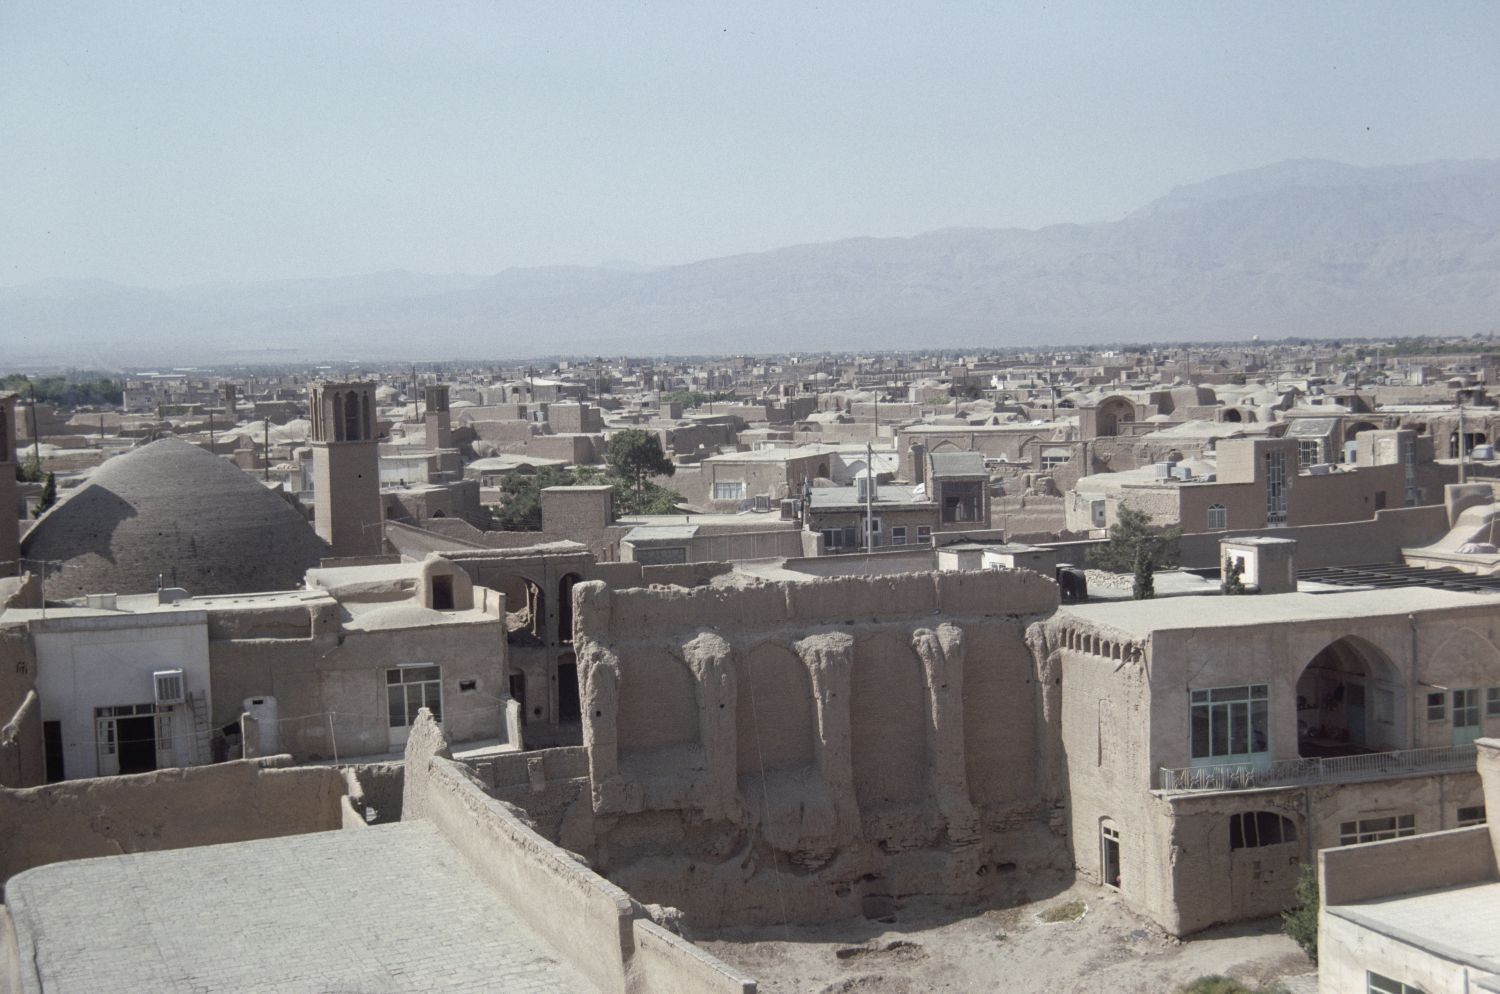 View over old city of Kashan, Iran, facing south. Taken from roof of&nbsp;<a href="https://archnet.org/sites/1625" target="_blank" data-bypass="true">Aqa Buzurg Mosque</a>.